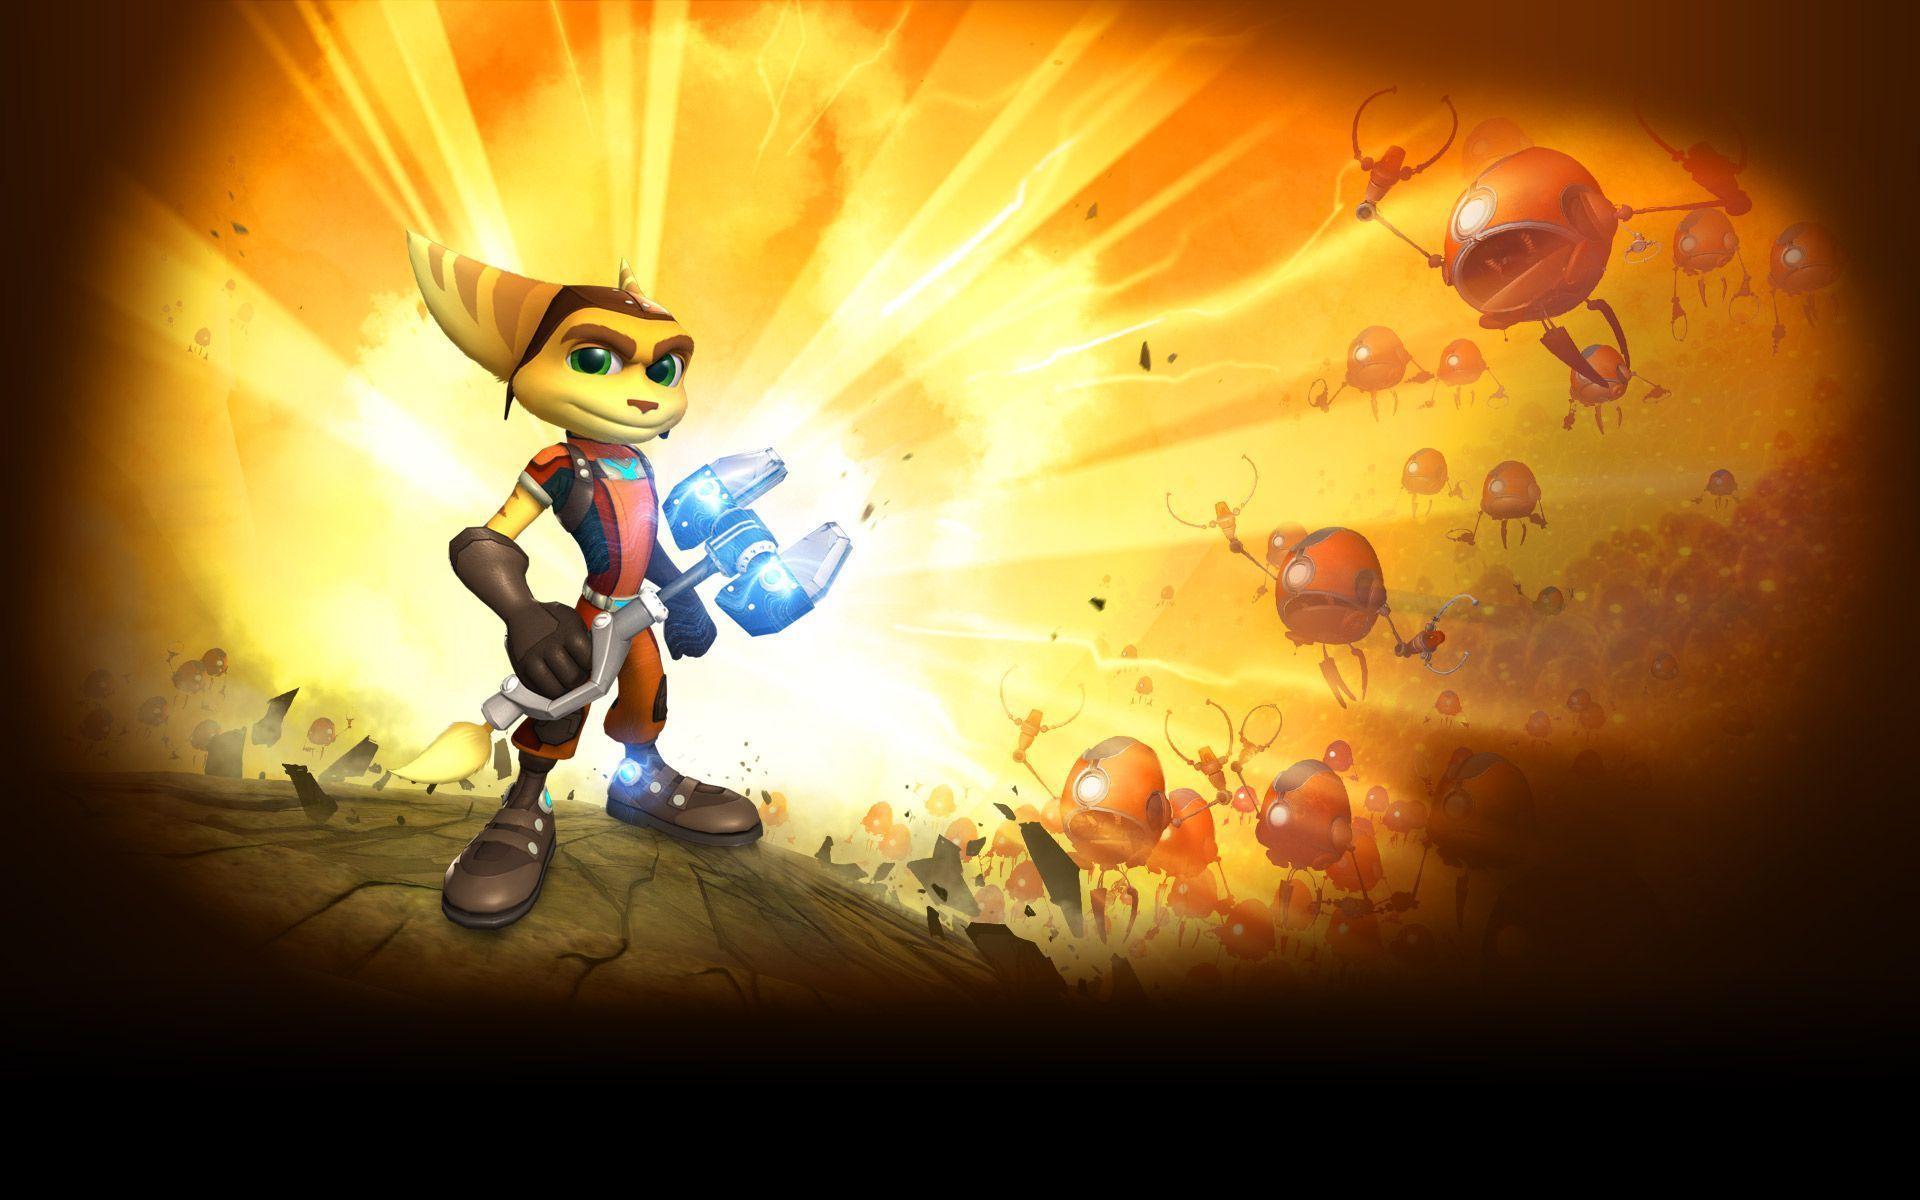 1) Ratchet.PNG and Clank Wallpaper